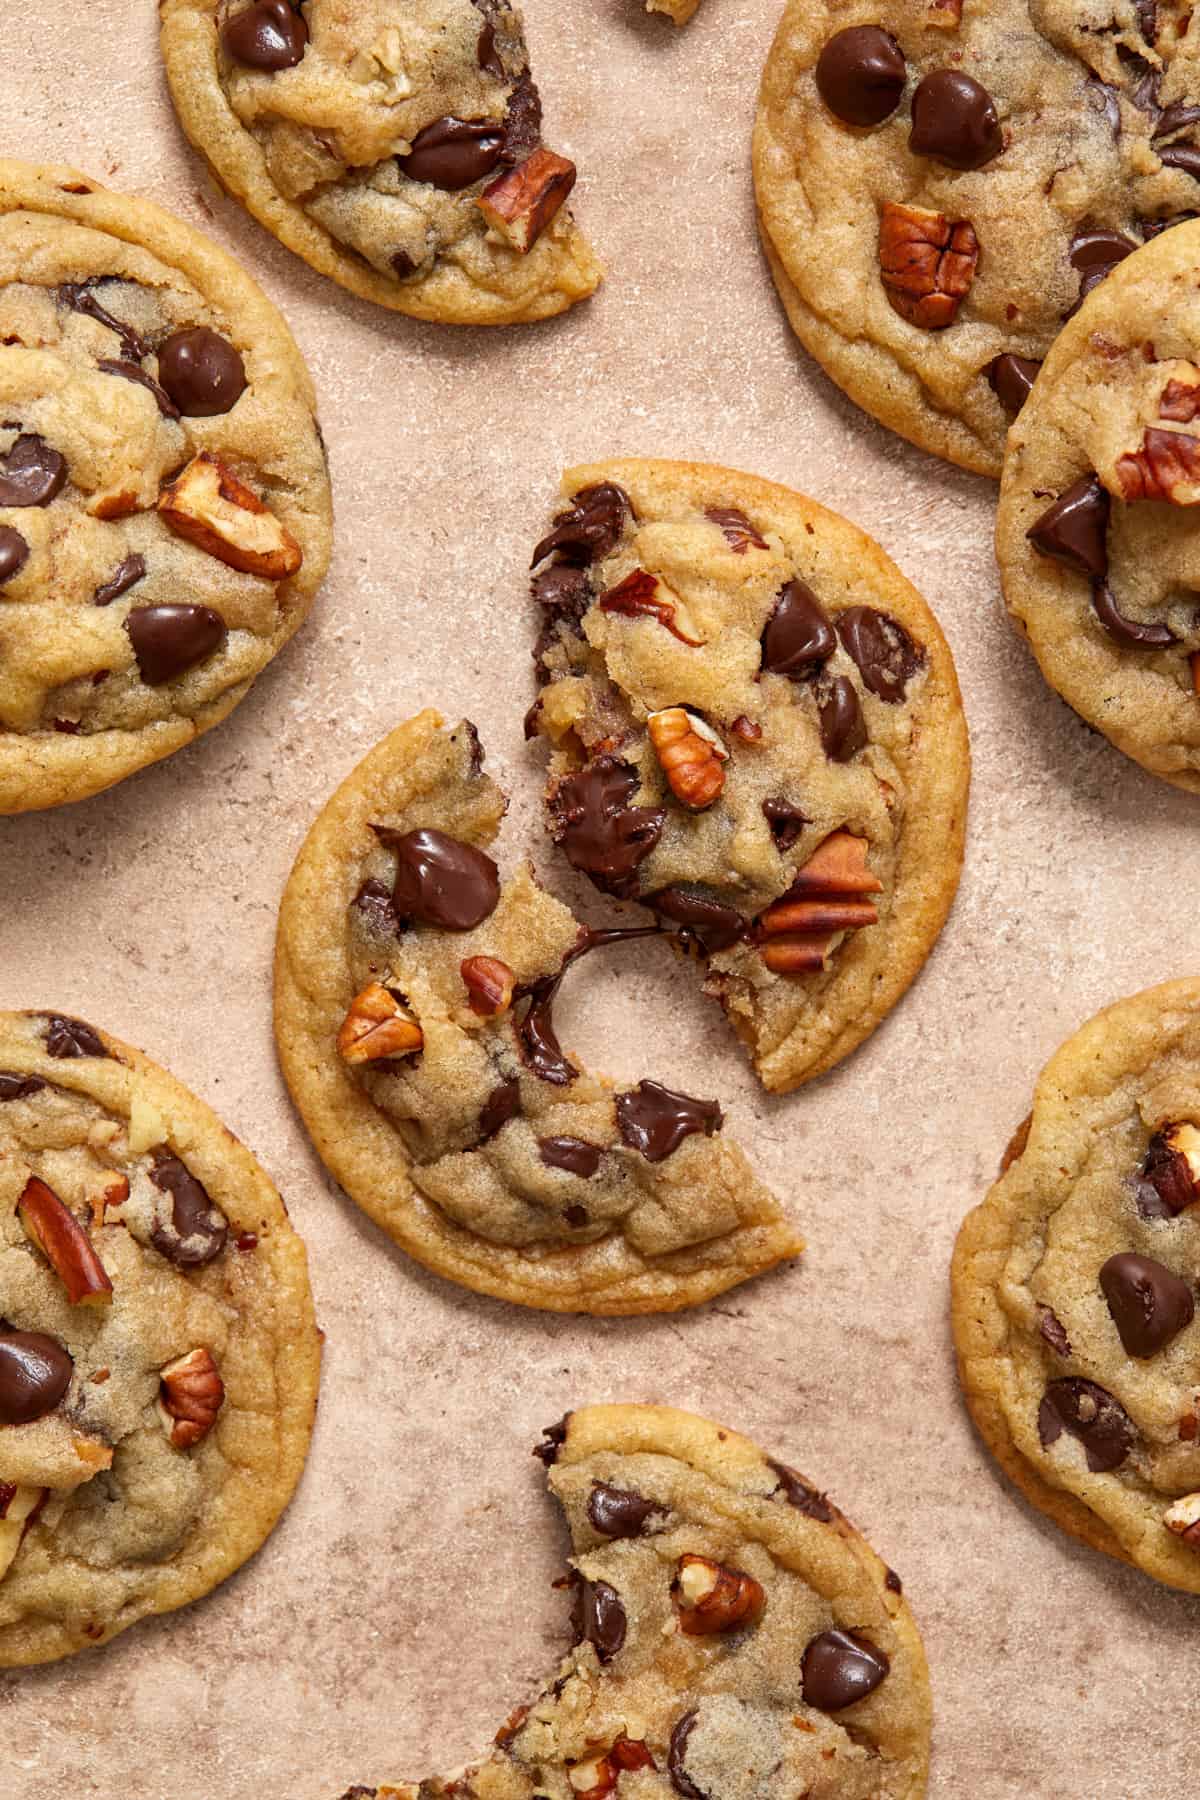 Chocolate chip cookies with pecans on surface with focus on center cookie broken in half with melted chocolate string connecting the pieces.